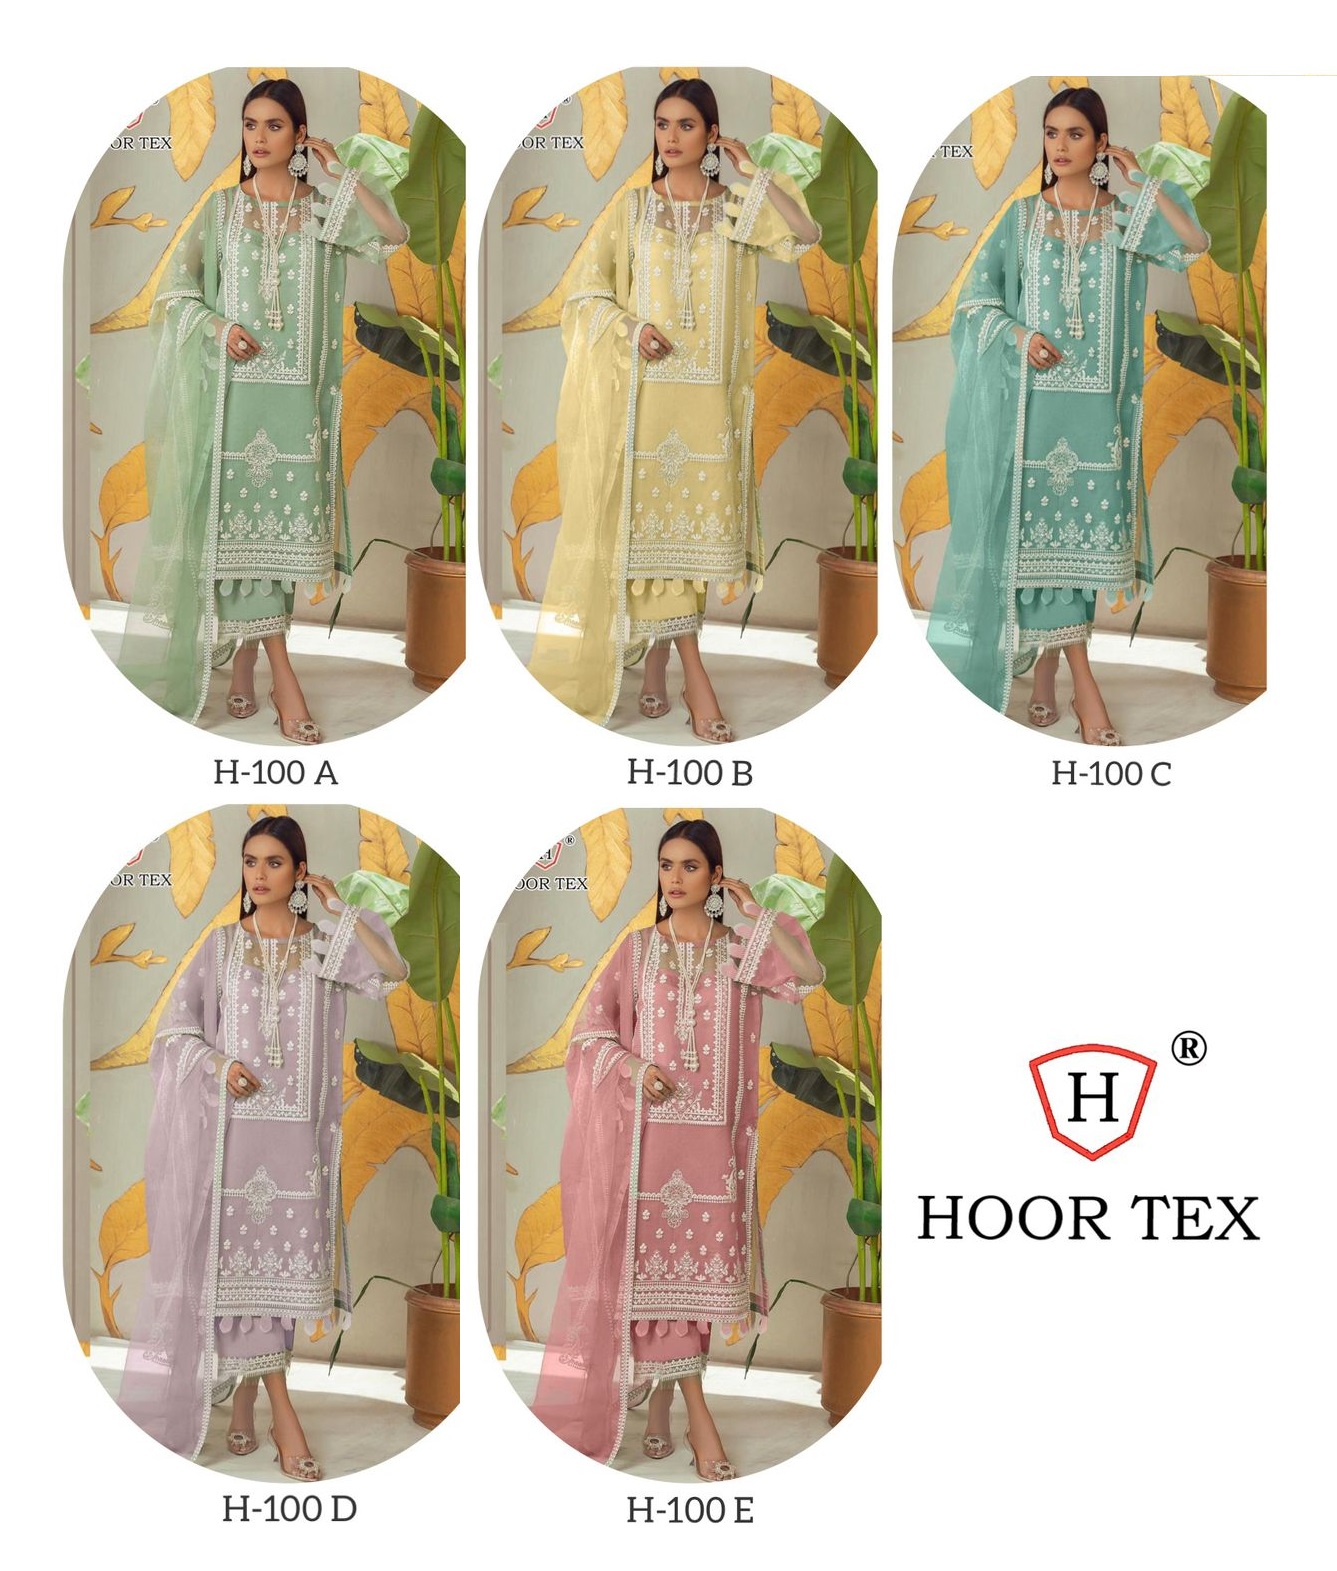 HOOR TEX H 100 A TO E PAKISTANI SUITS IN INDIA